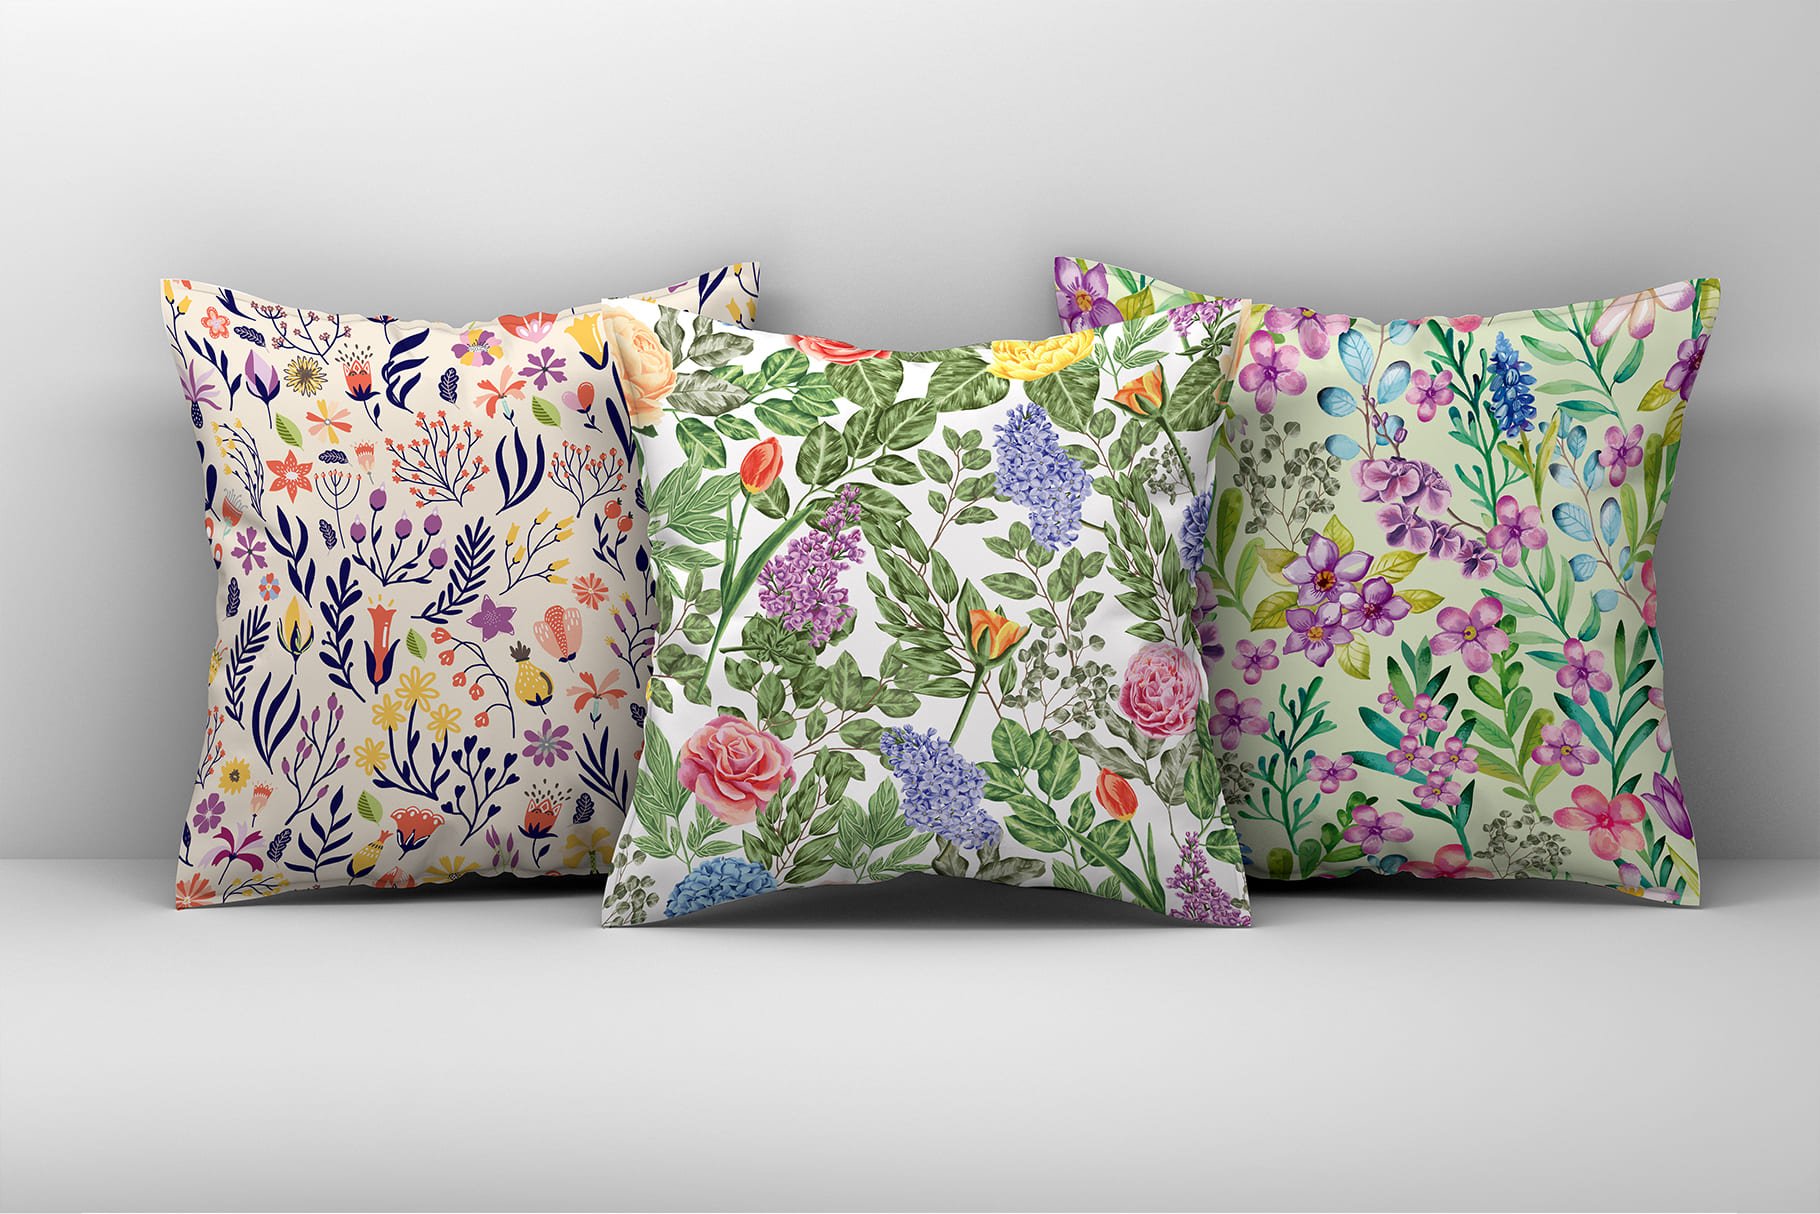 Decorative pillows decorated with floral patterns.